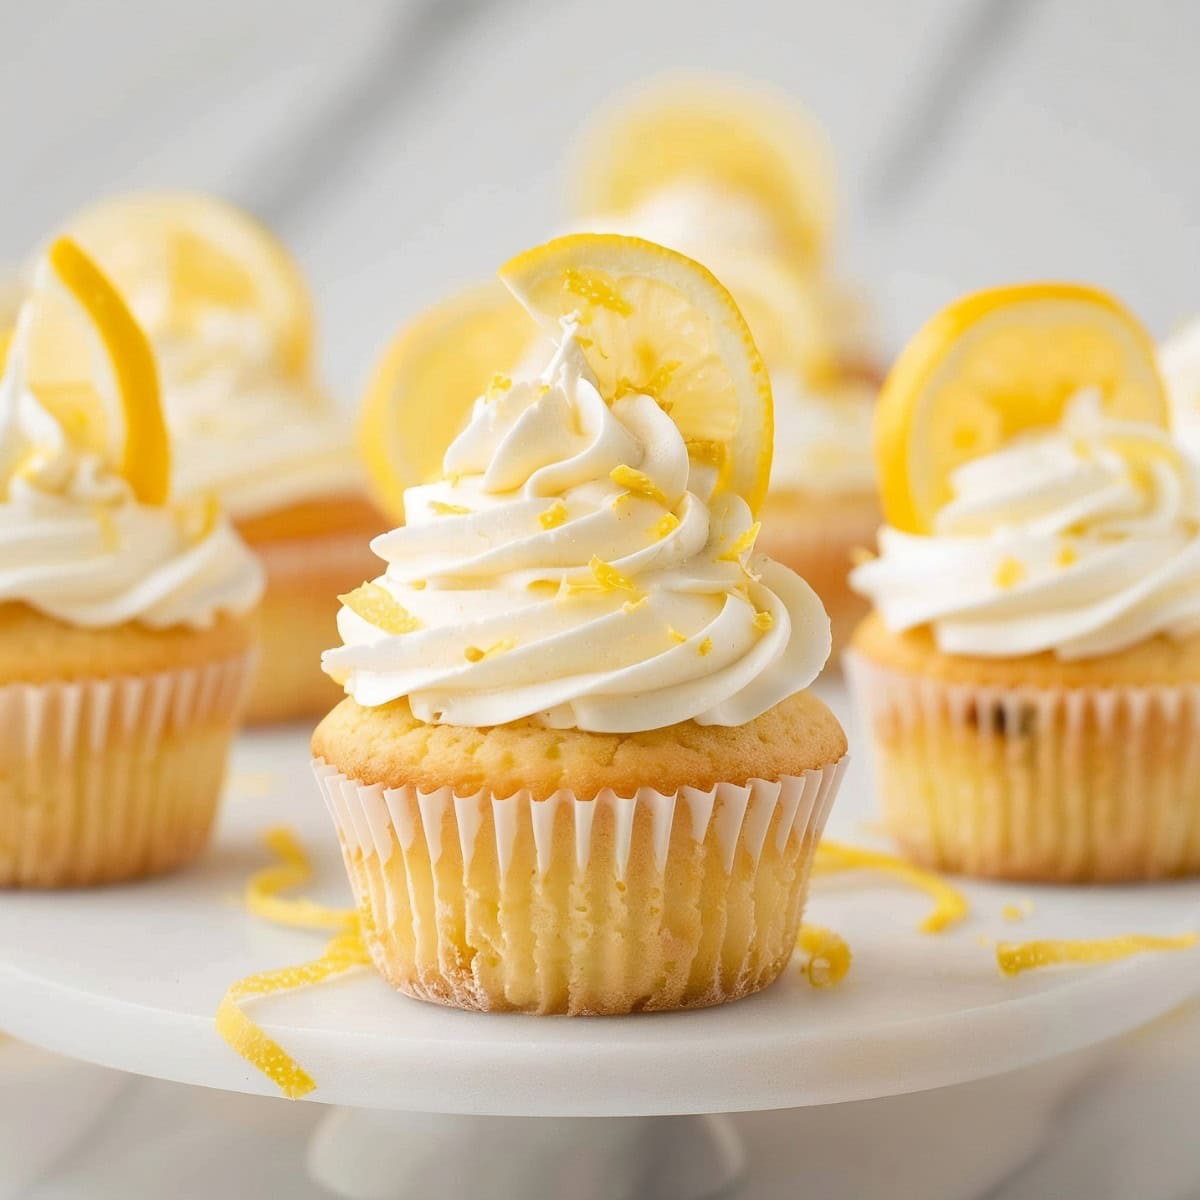 Moist, fluffy and zingy lemon cupcakes in a decorated kitchen stand 